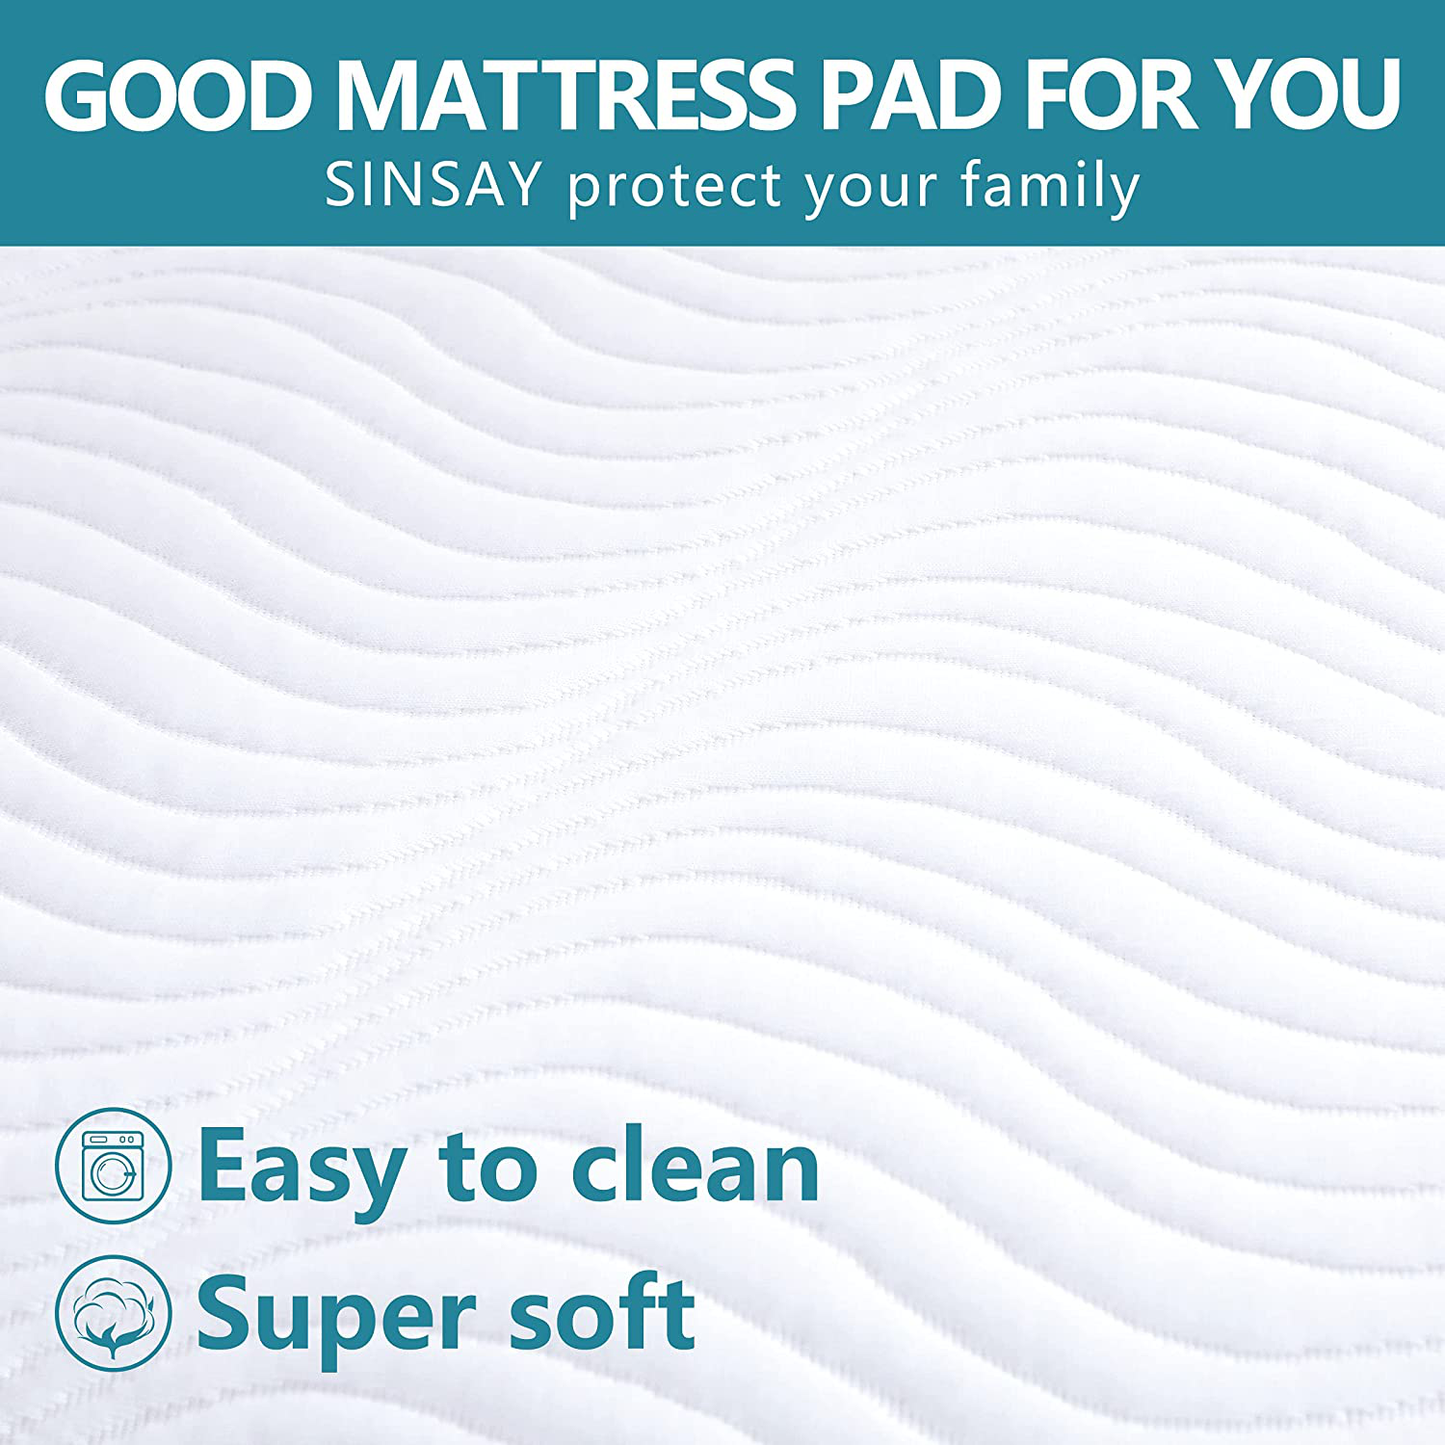 SINSAY King Size Waterproof Mattress Protector, Breathable Ultra-Soft & Noiseless Protector Cover, Stretchable Deep Pocket Fits Up to 21" Mattress Pad, Easy to Clean Machine-Wash Mattress Cover